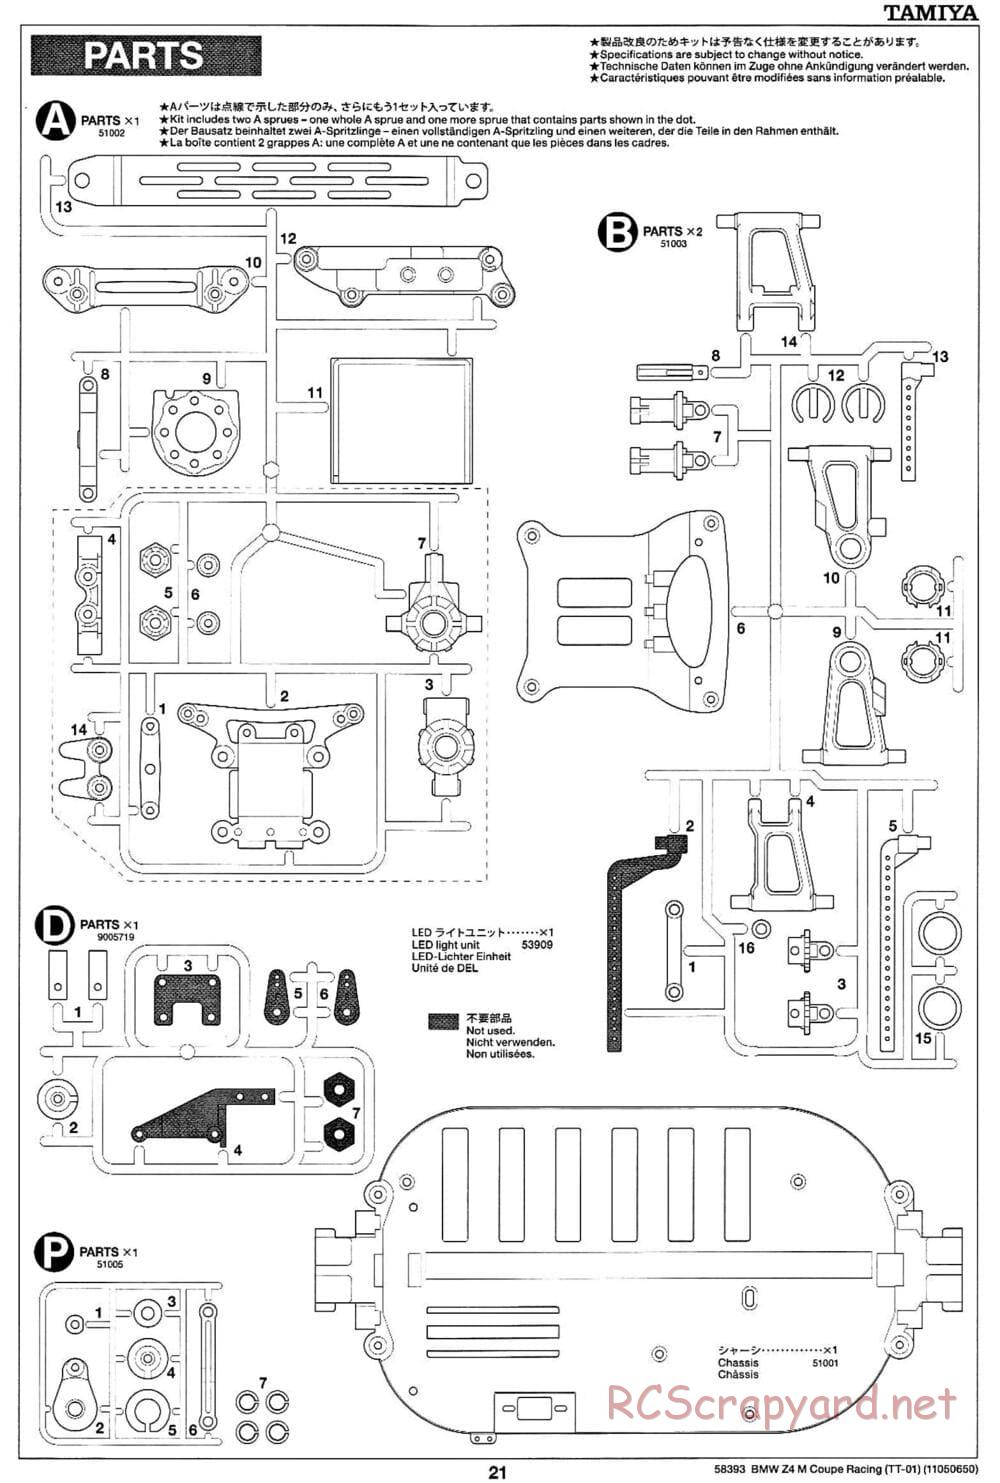 Tamiya - BMW Z4 M Coupe Racing - TT-01 Chassis - Manual - Page 21